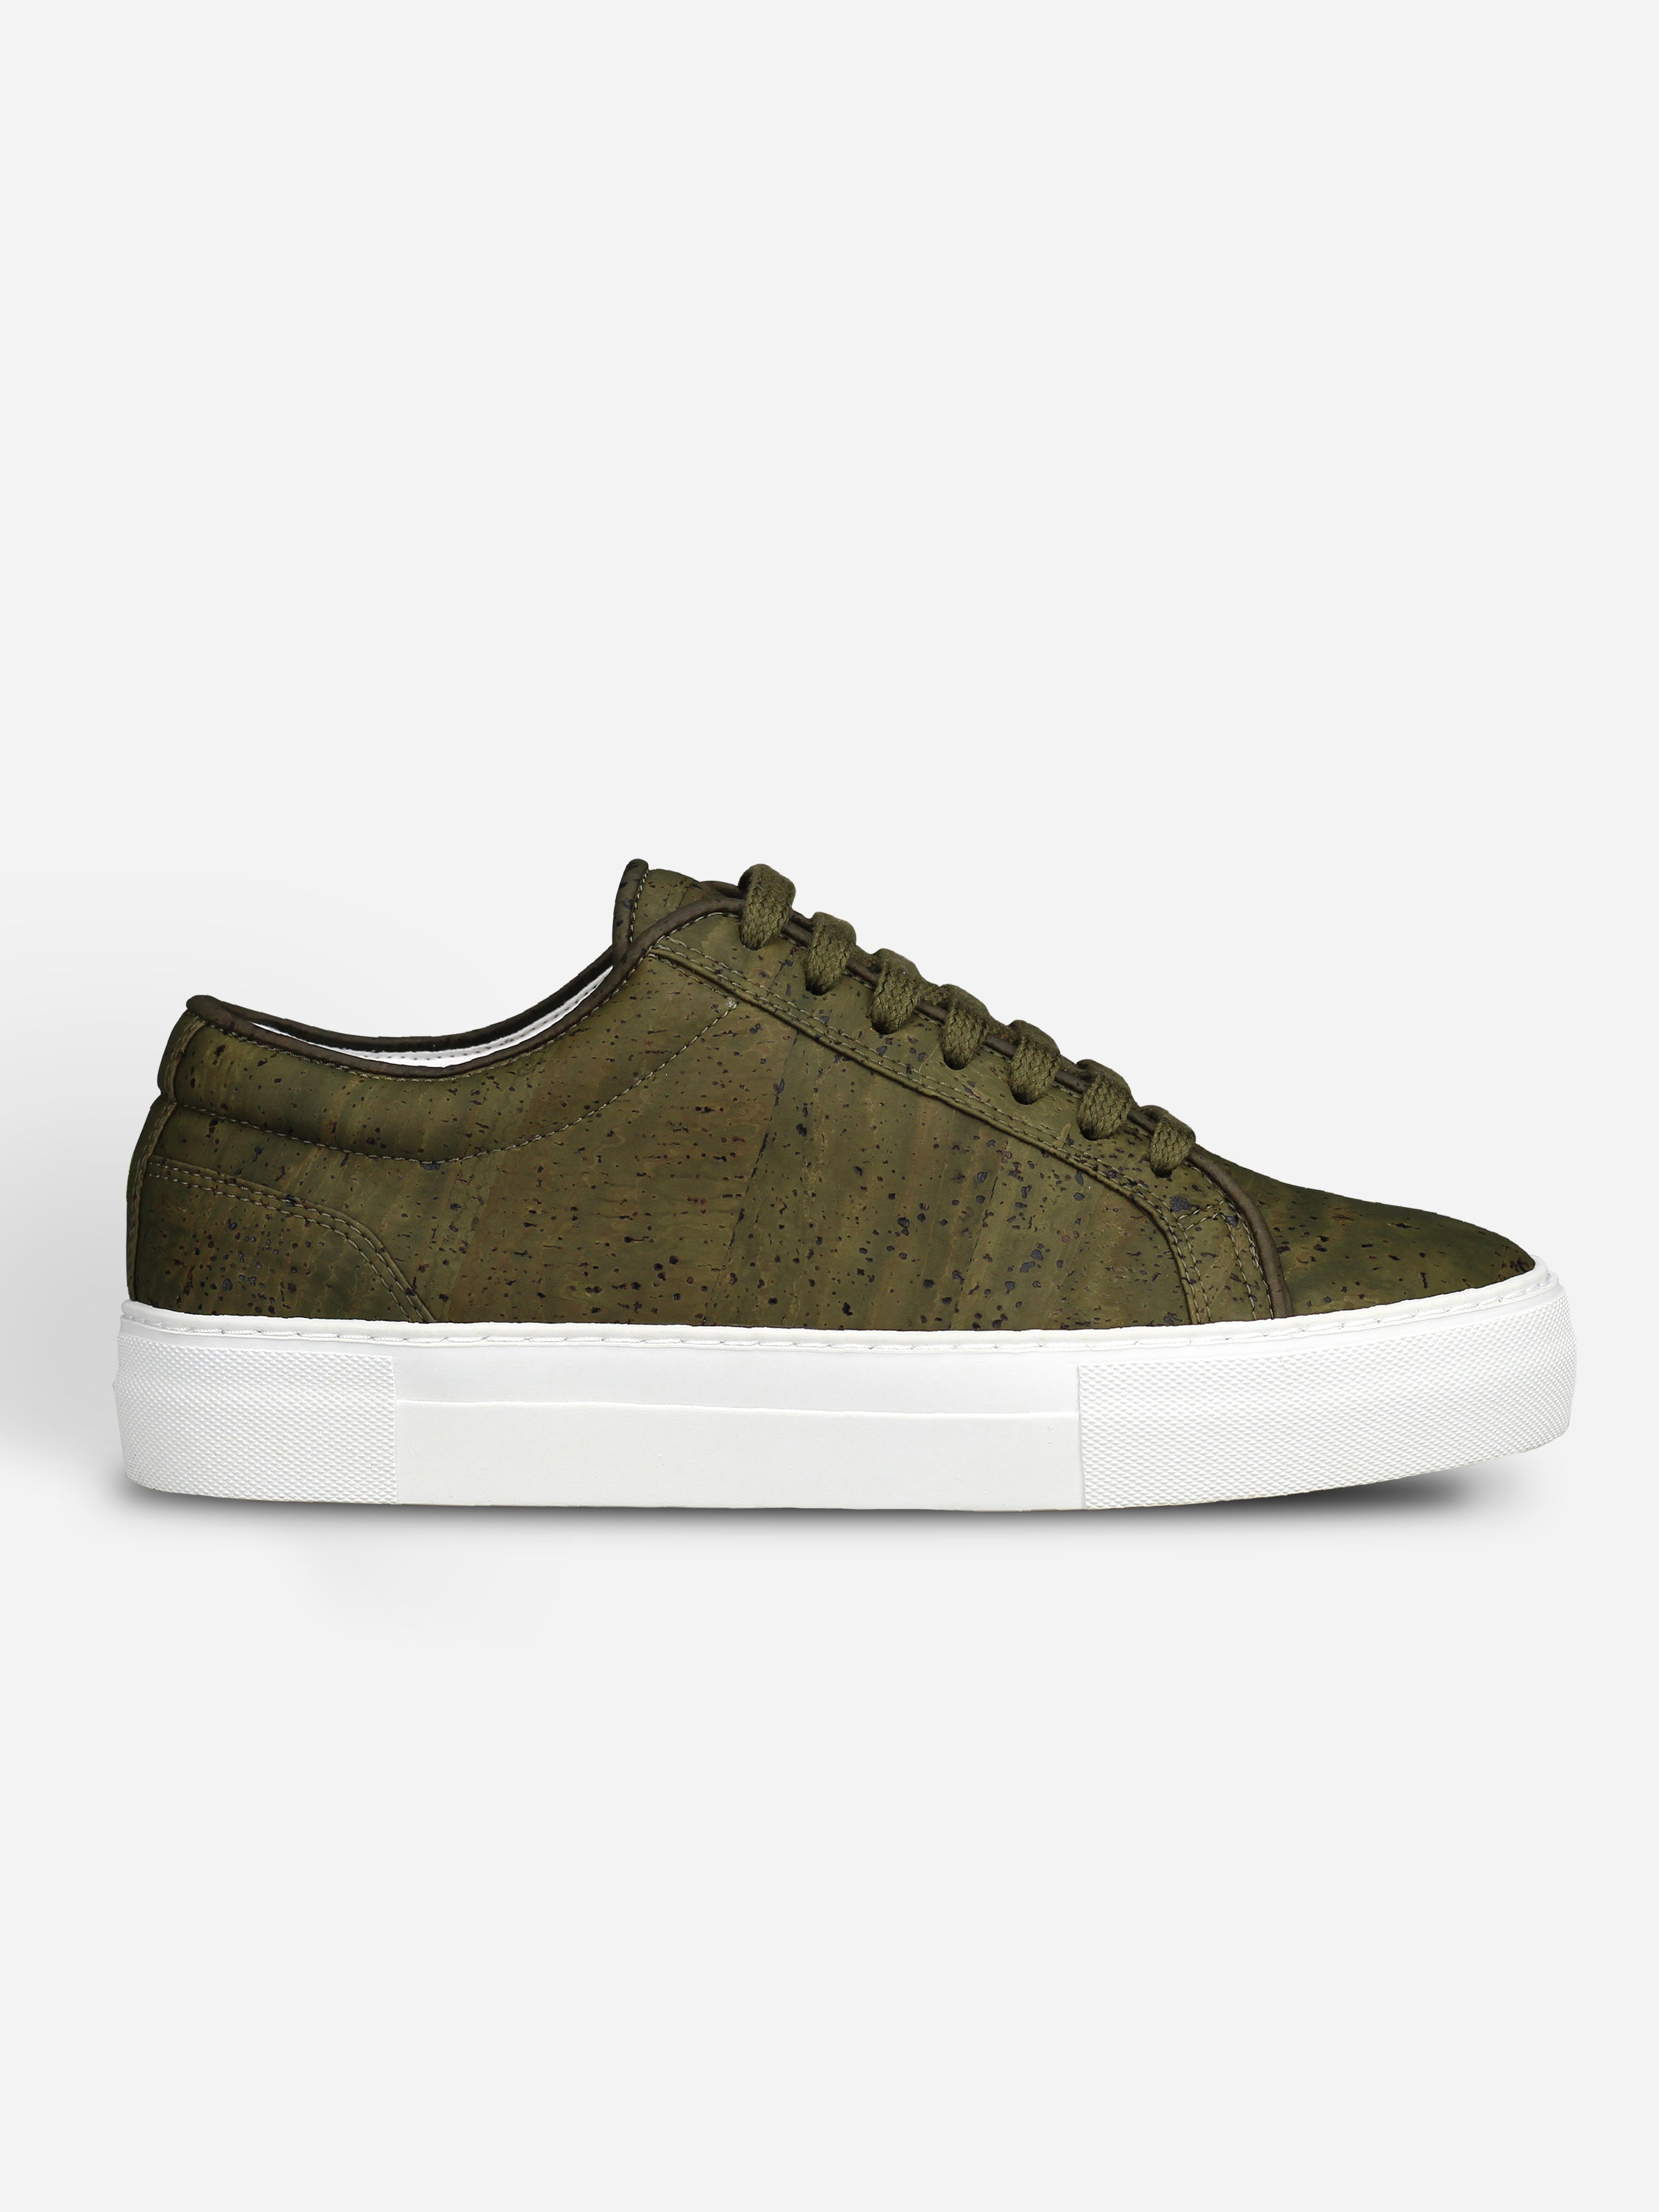 Essential - Olive Green